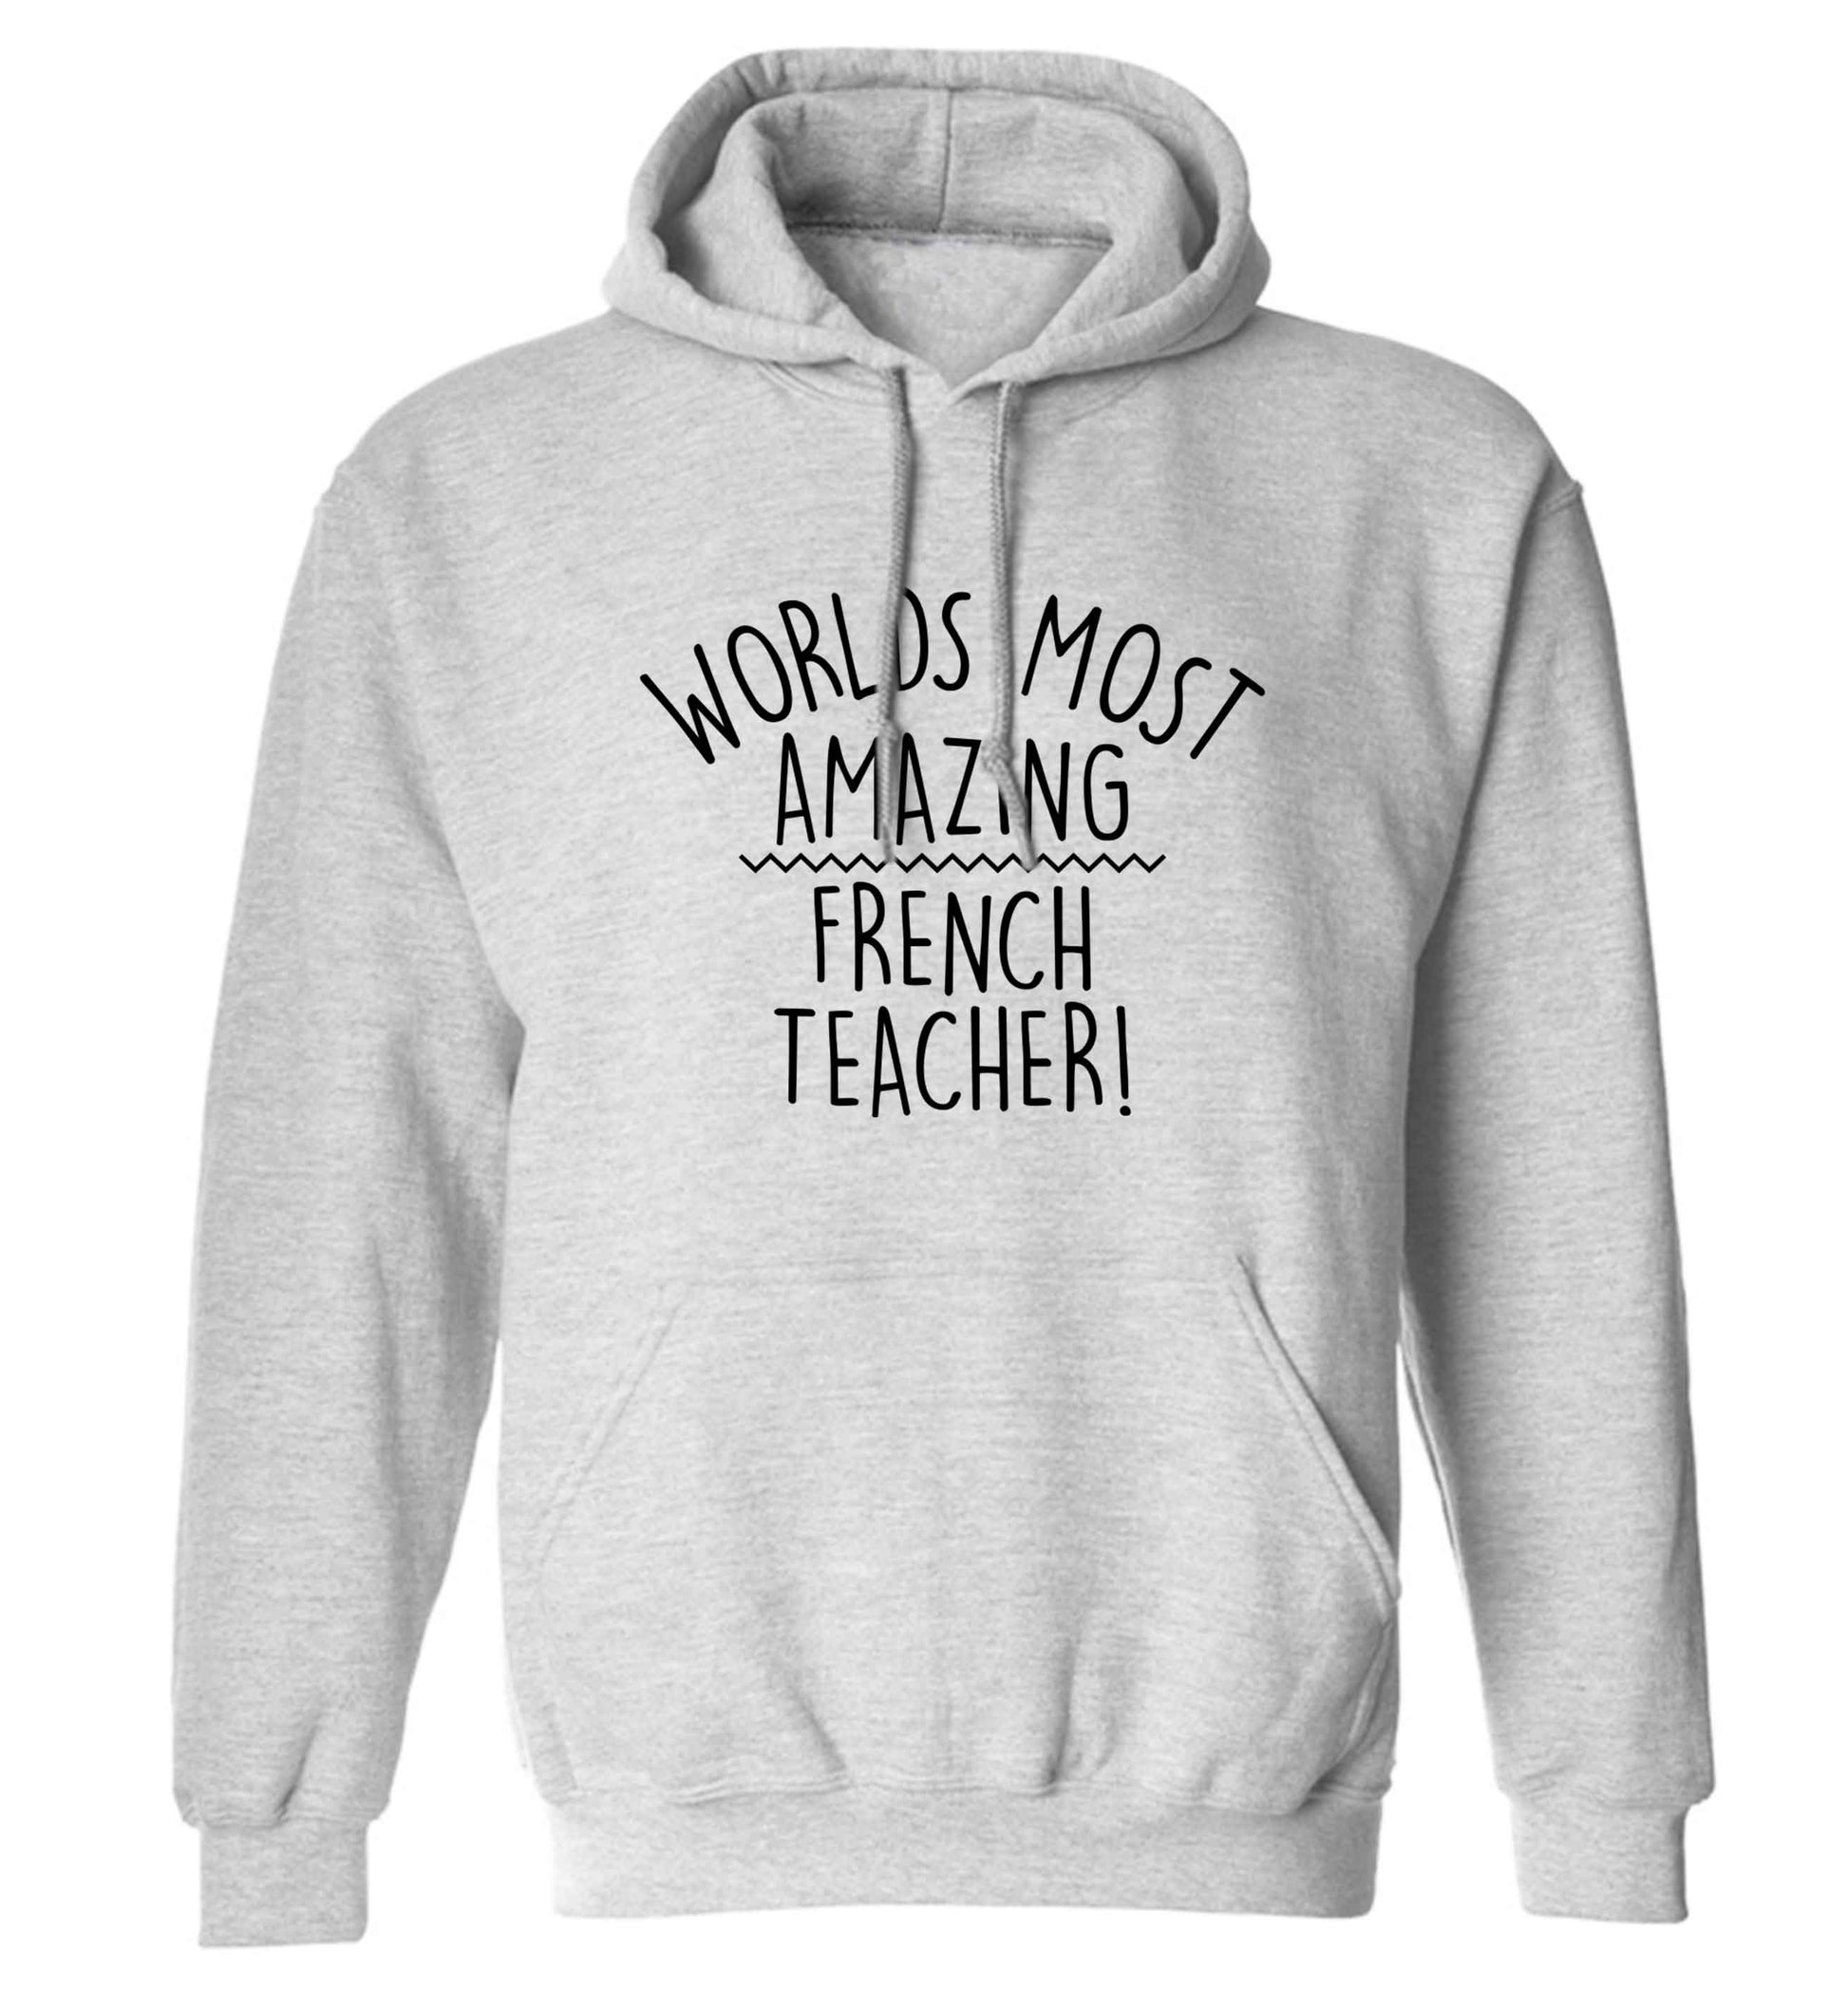 Worlds most amazing French teacher adults unisex grey hoodie 2XL